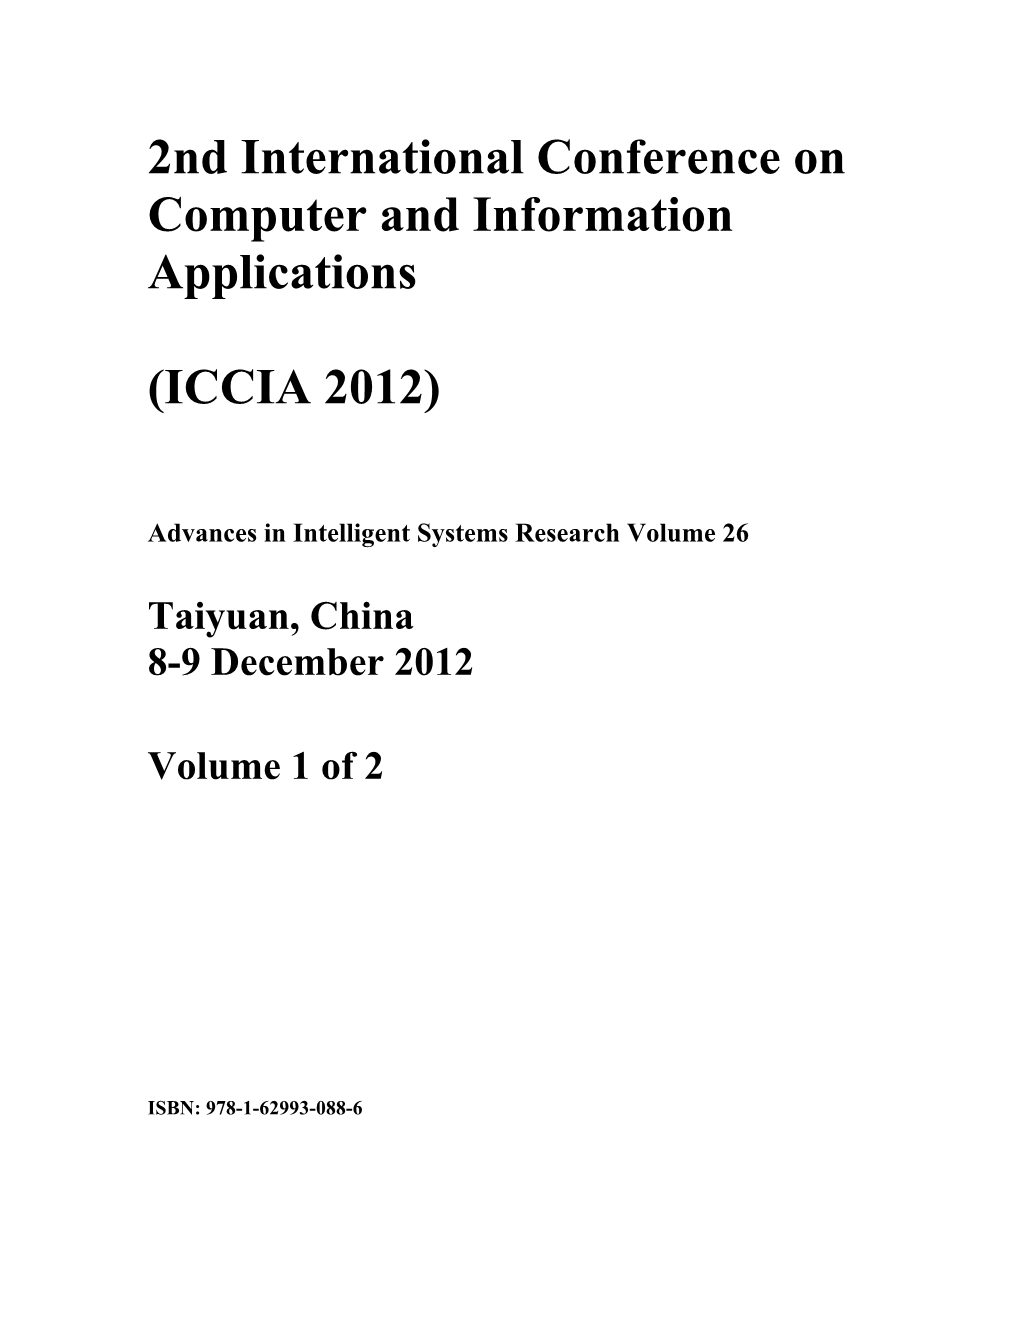 2Nd International Conference on Computer and Information Applications (ICCIA 2012)